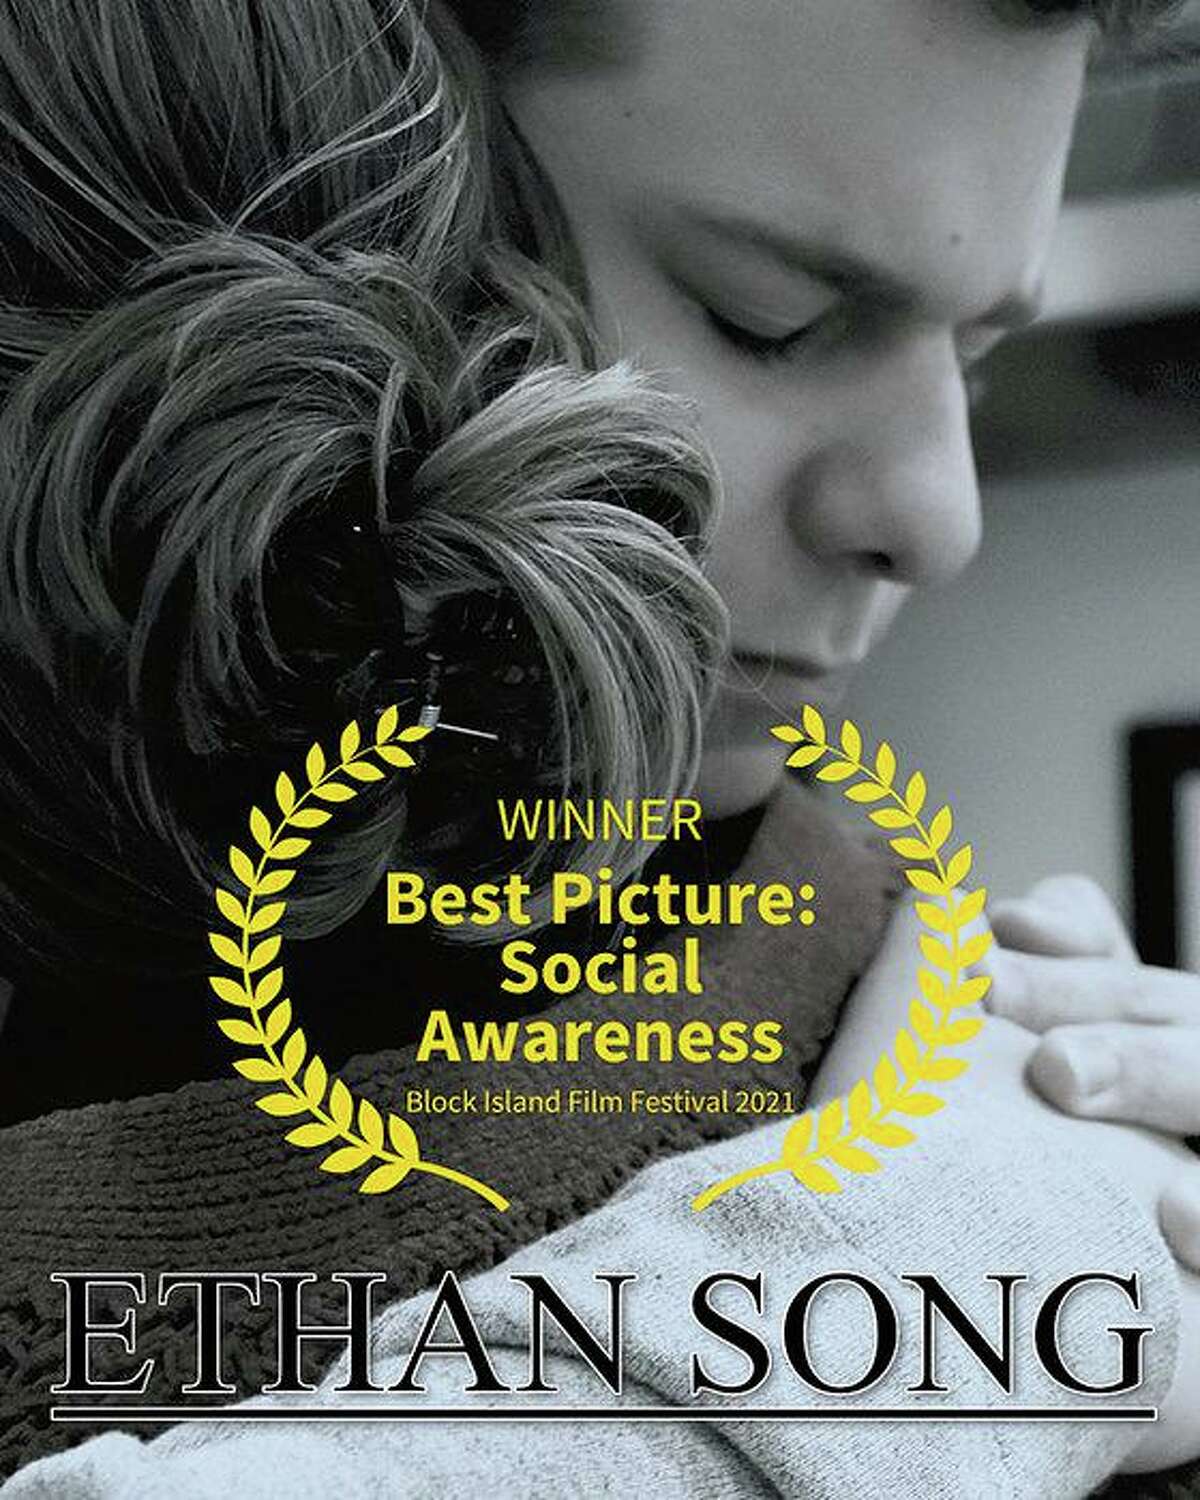 The award-winning film, “Ethan Song,” takes the viewer from the night before Ethan Song was killed, to the moment he fatally shot himself at a friend’s home. It will premiere Wednesday, Oct. 27.